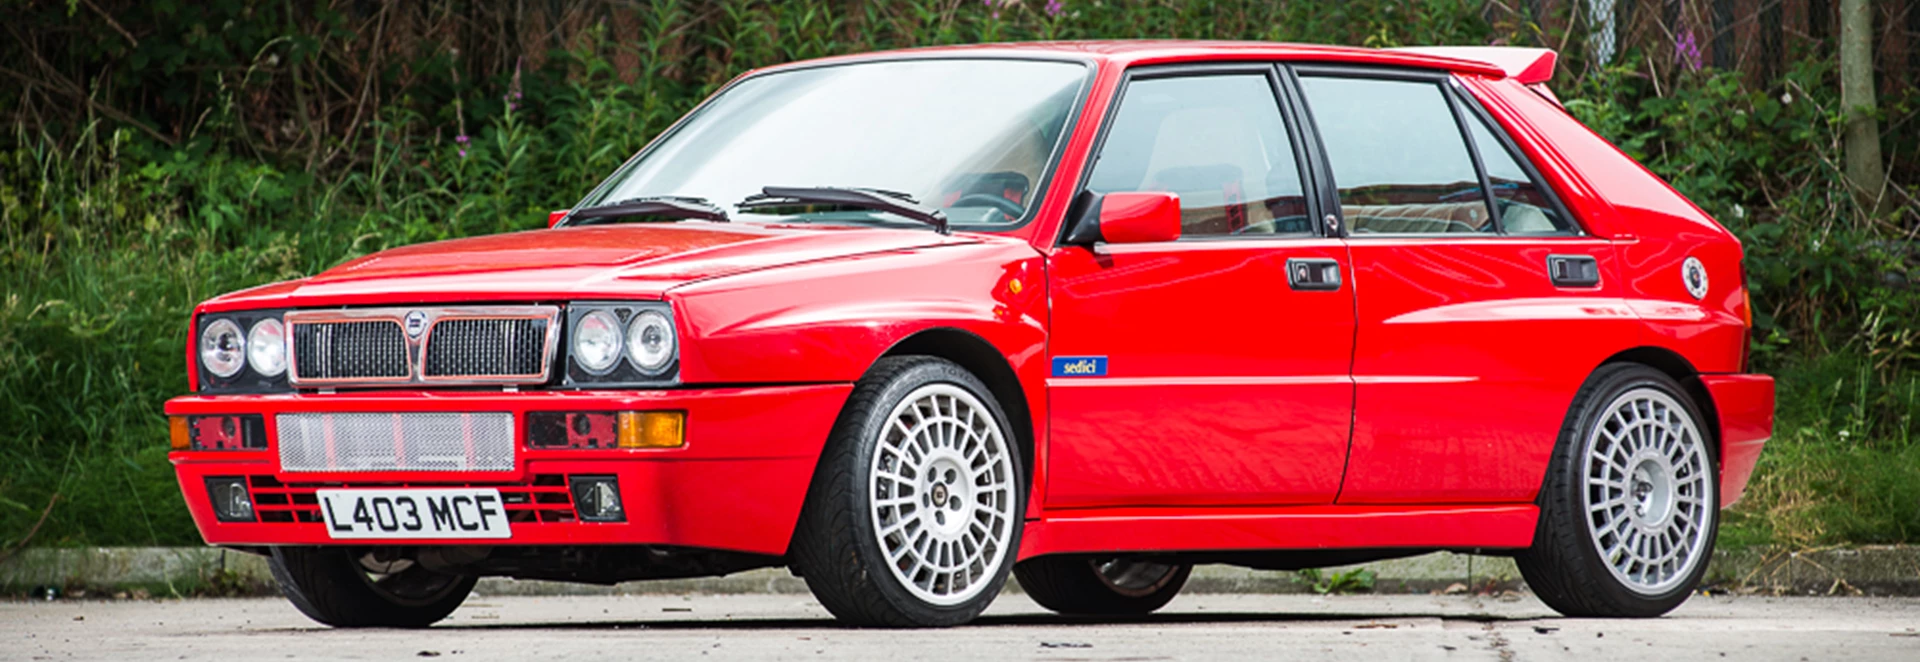 For £35,000 would you buy Jay Kay’s stunning Lancia Delta HF Integrale? 